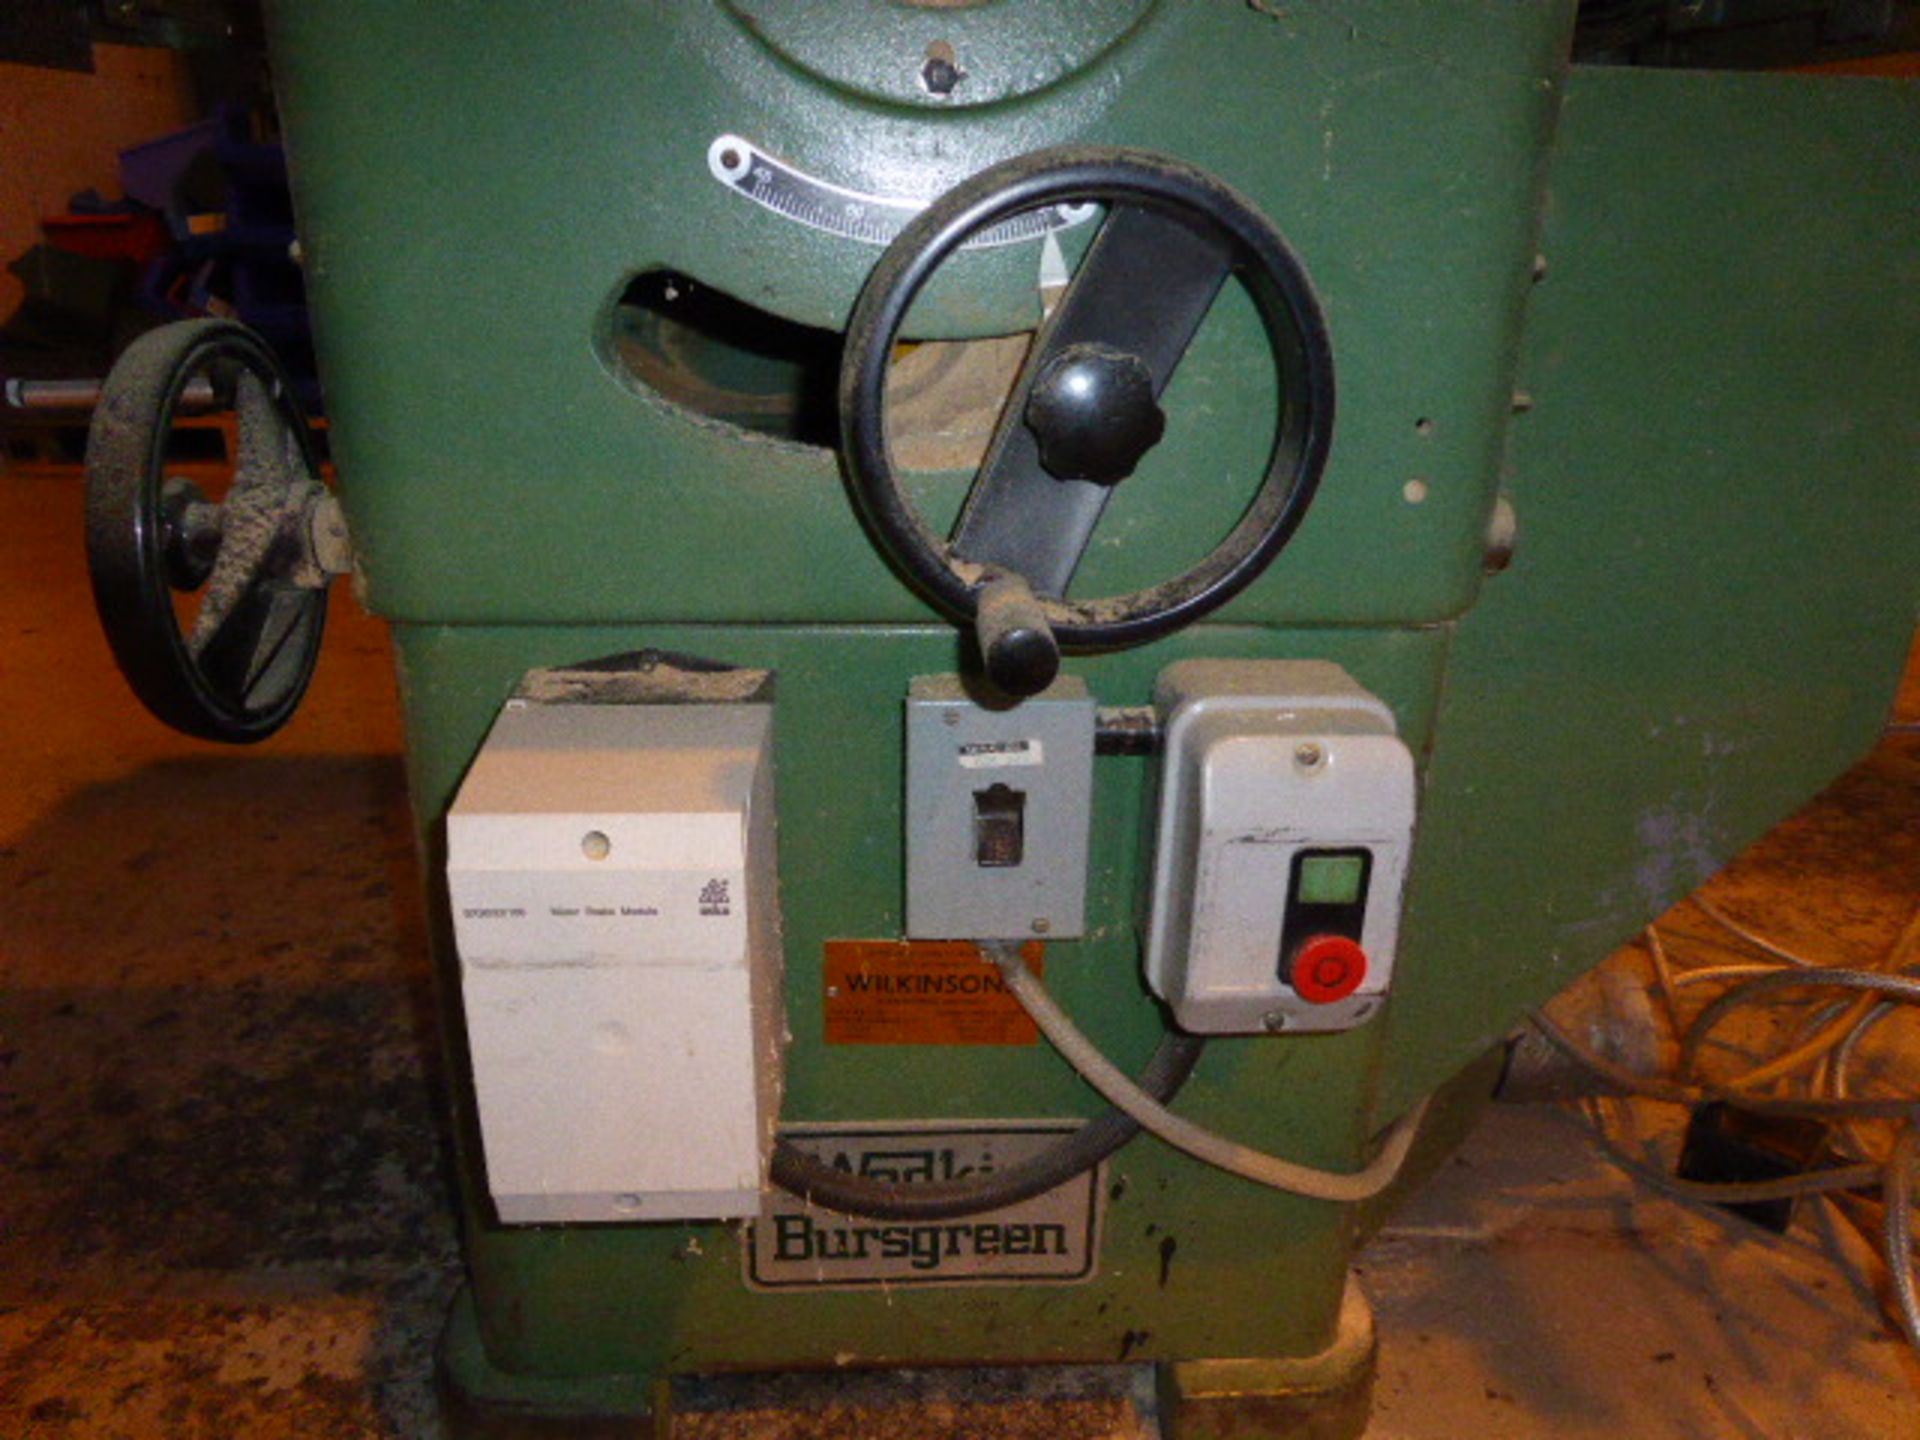 Wadkin Bursgreen tilt arbour saw bench Machine No: 12'' AGS 864672 with a range of spare blades - Image 7 of 7